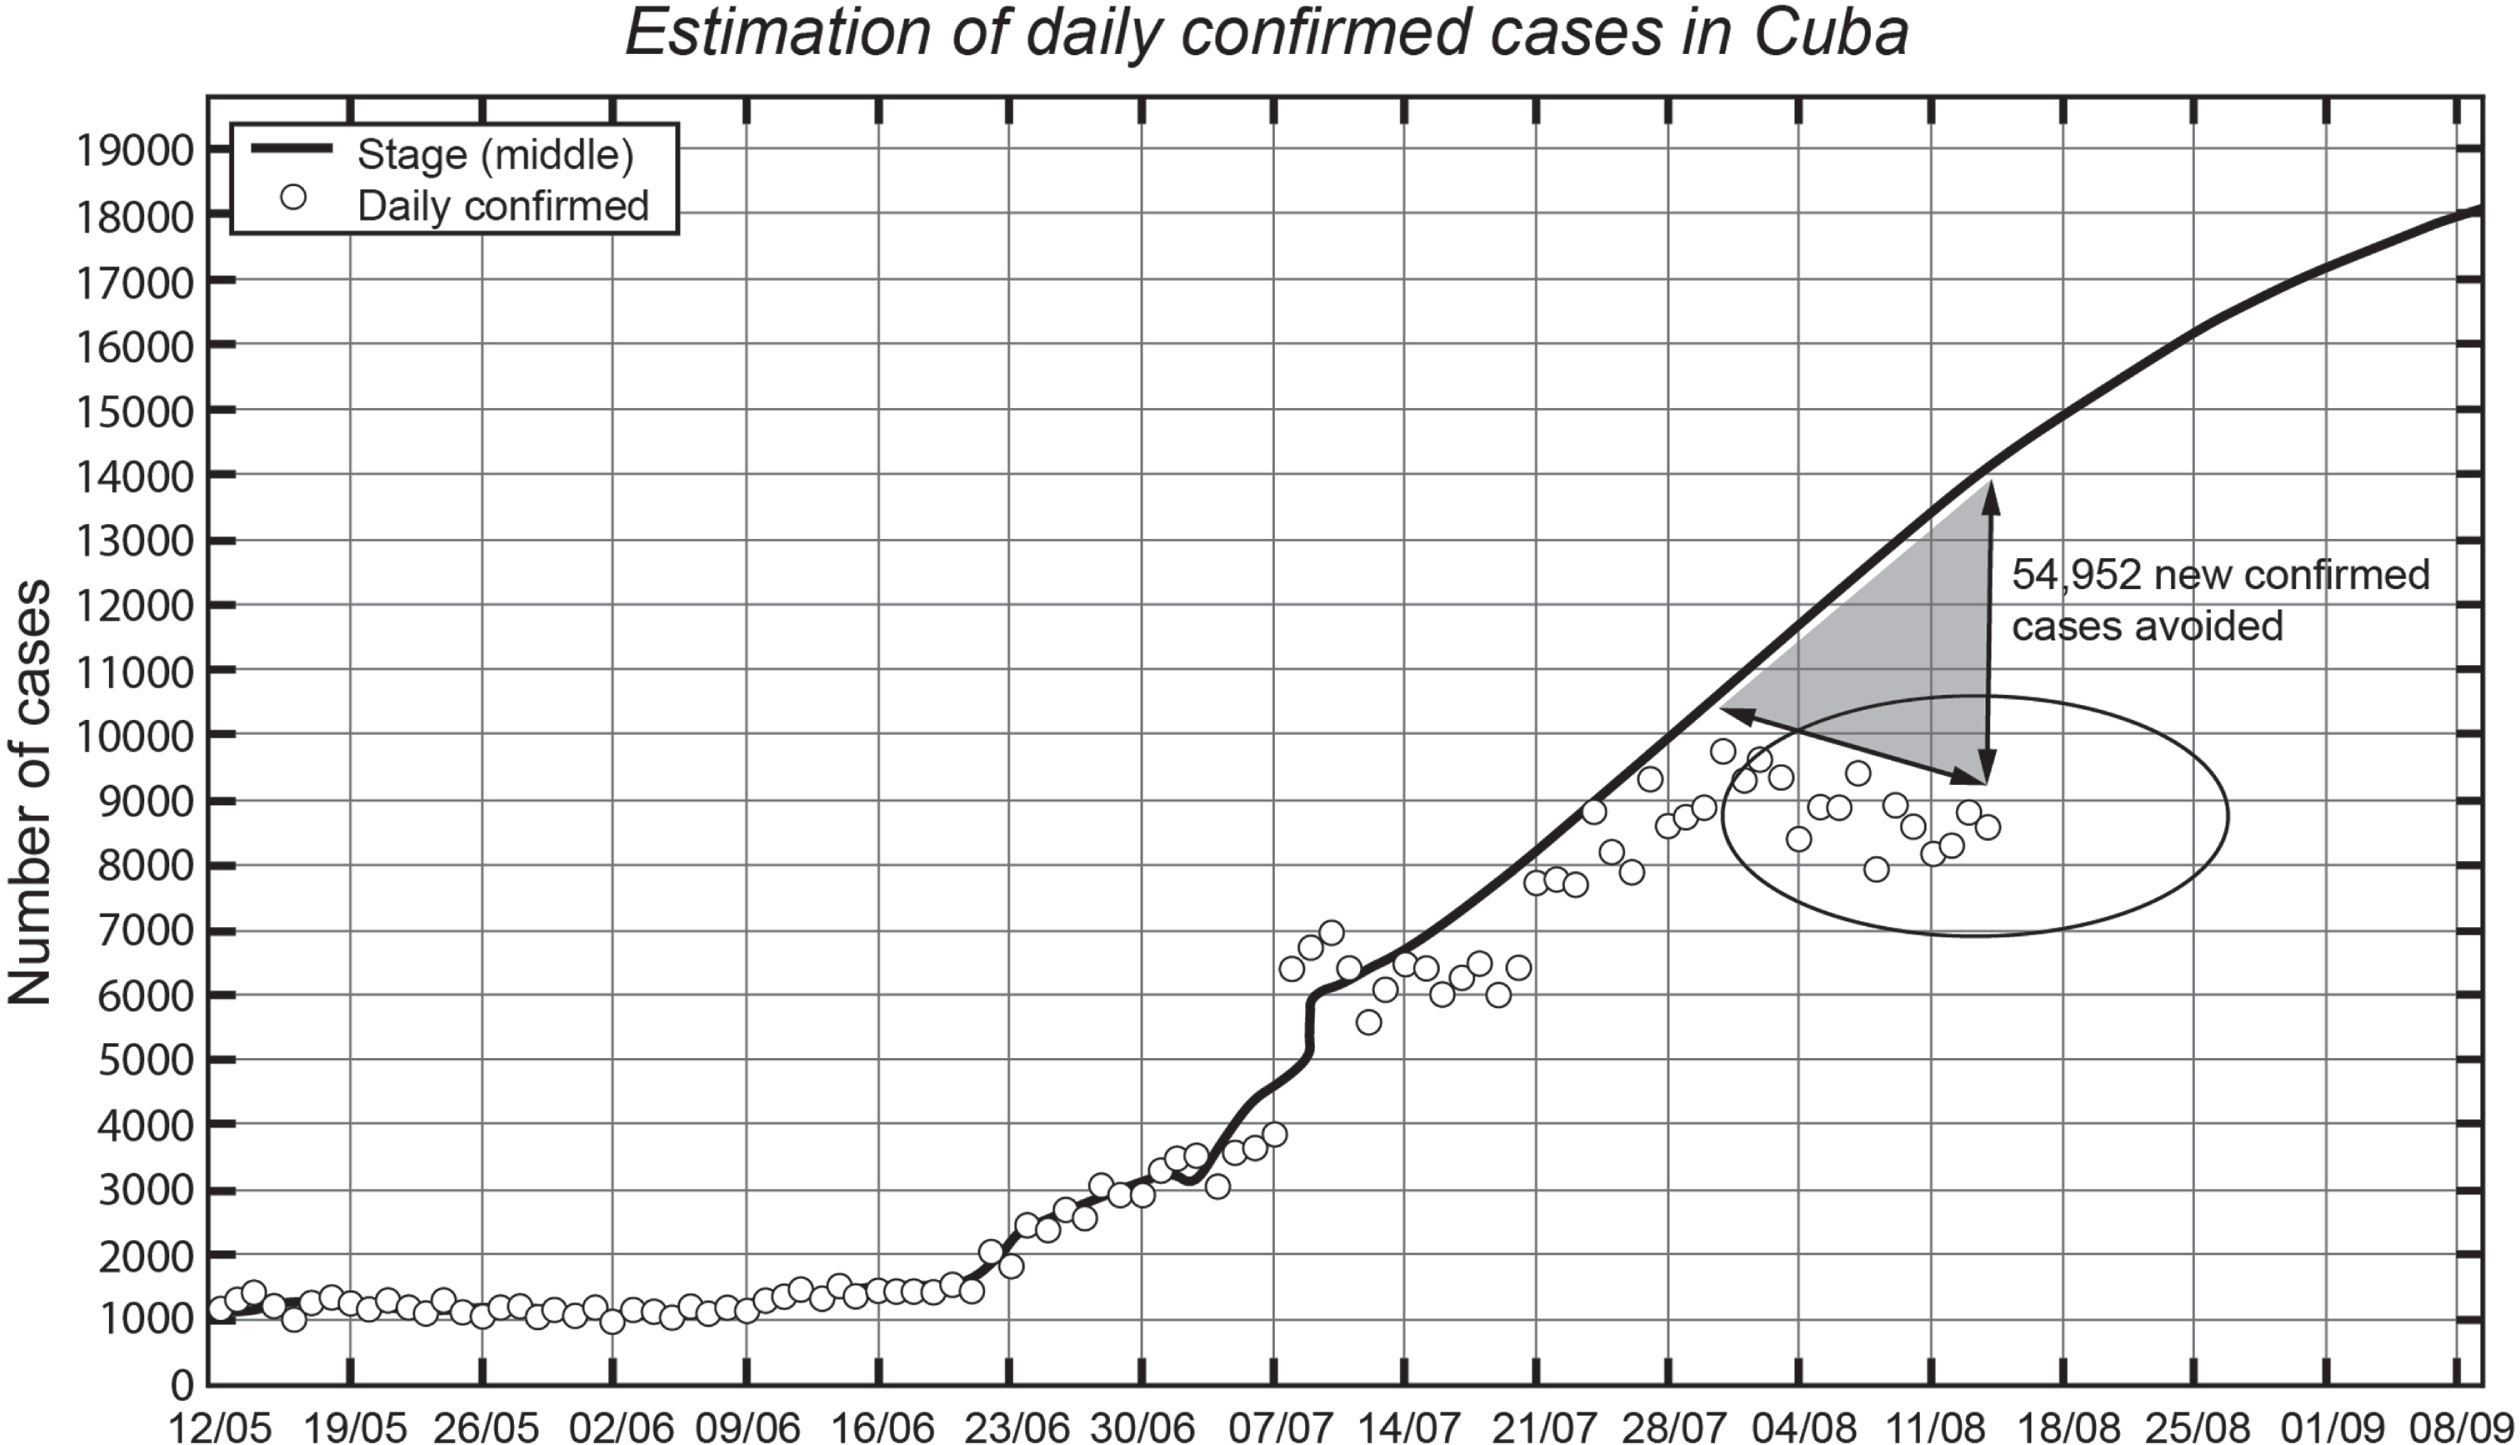 Estimate of confirmed cases and cumulative real. Source: Cubadebate Official Site [30].